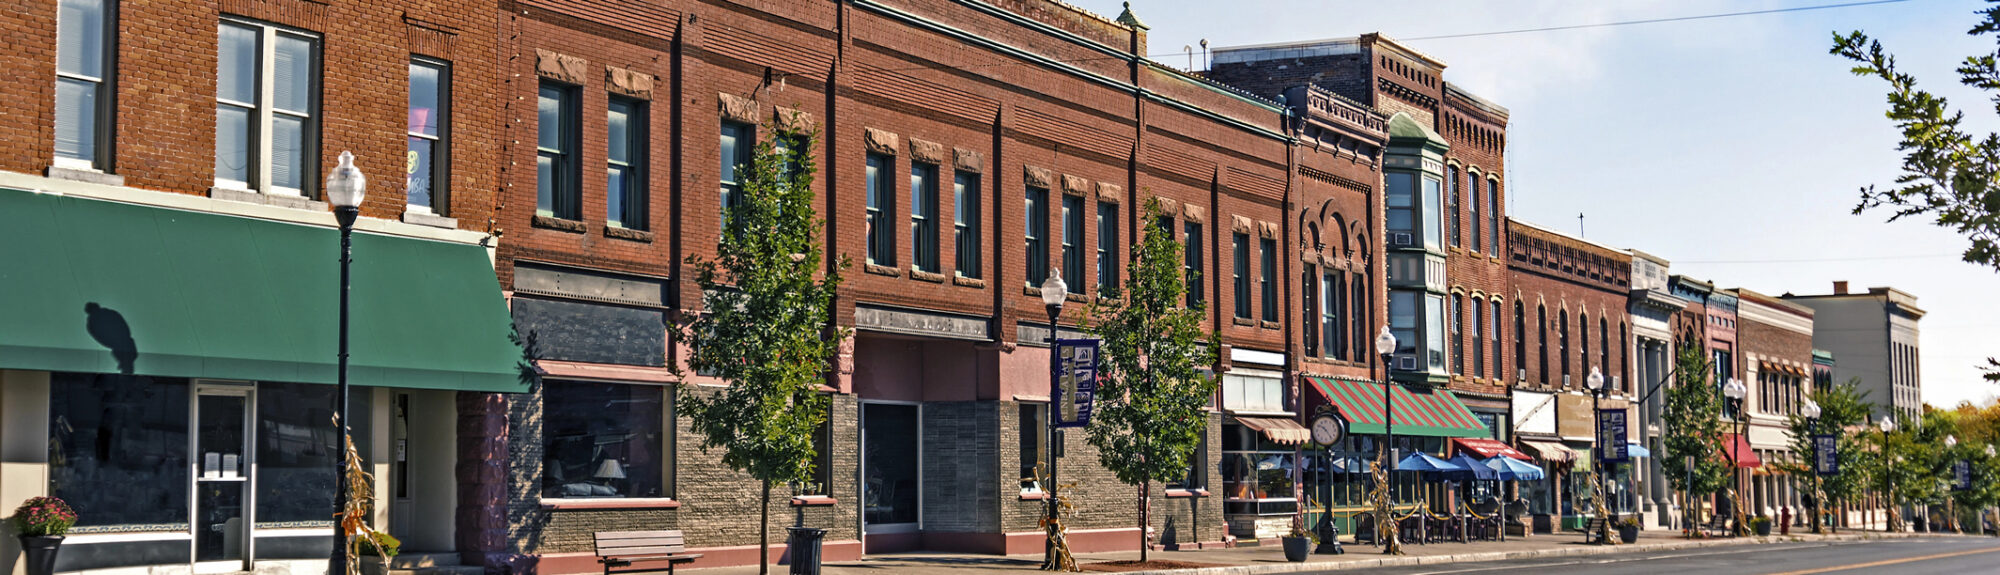 Historic downtown street with brick buildings and storefronts.